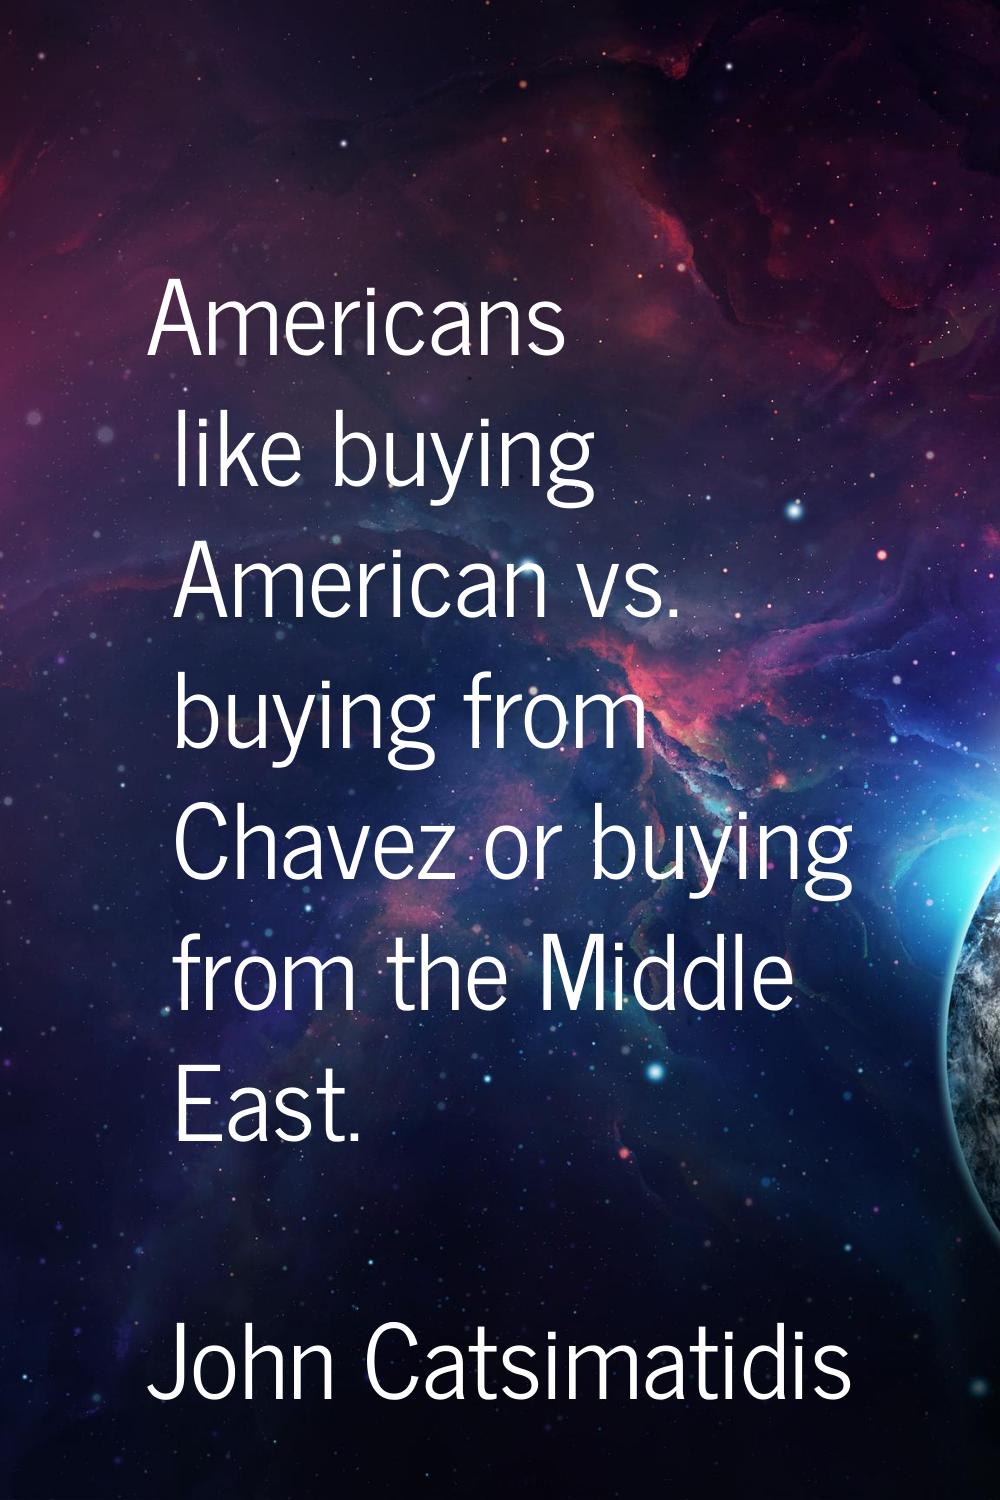 Americans like buying American vs. buying from Chavez or buying from the Middle East.